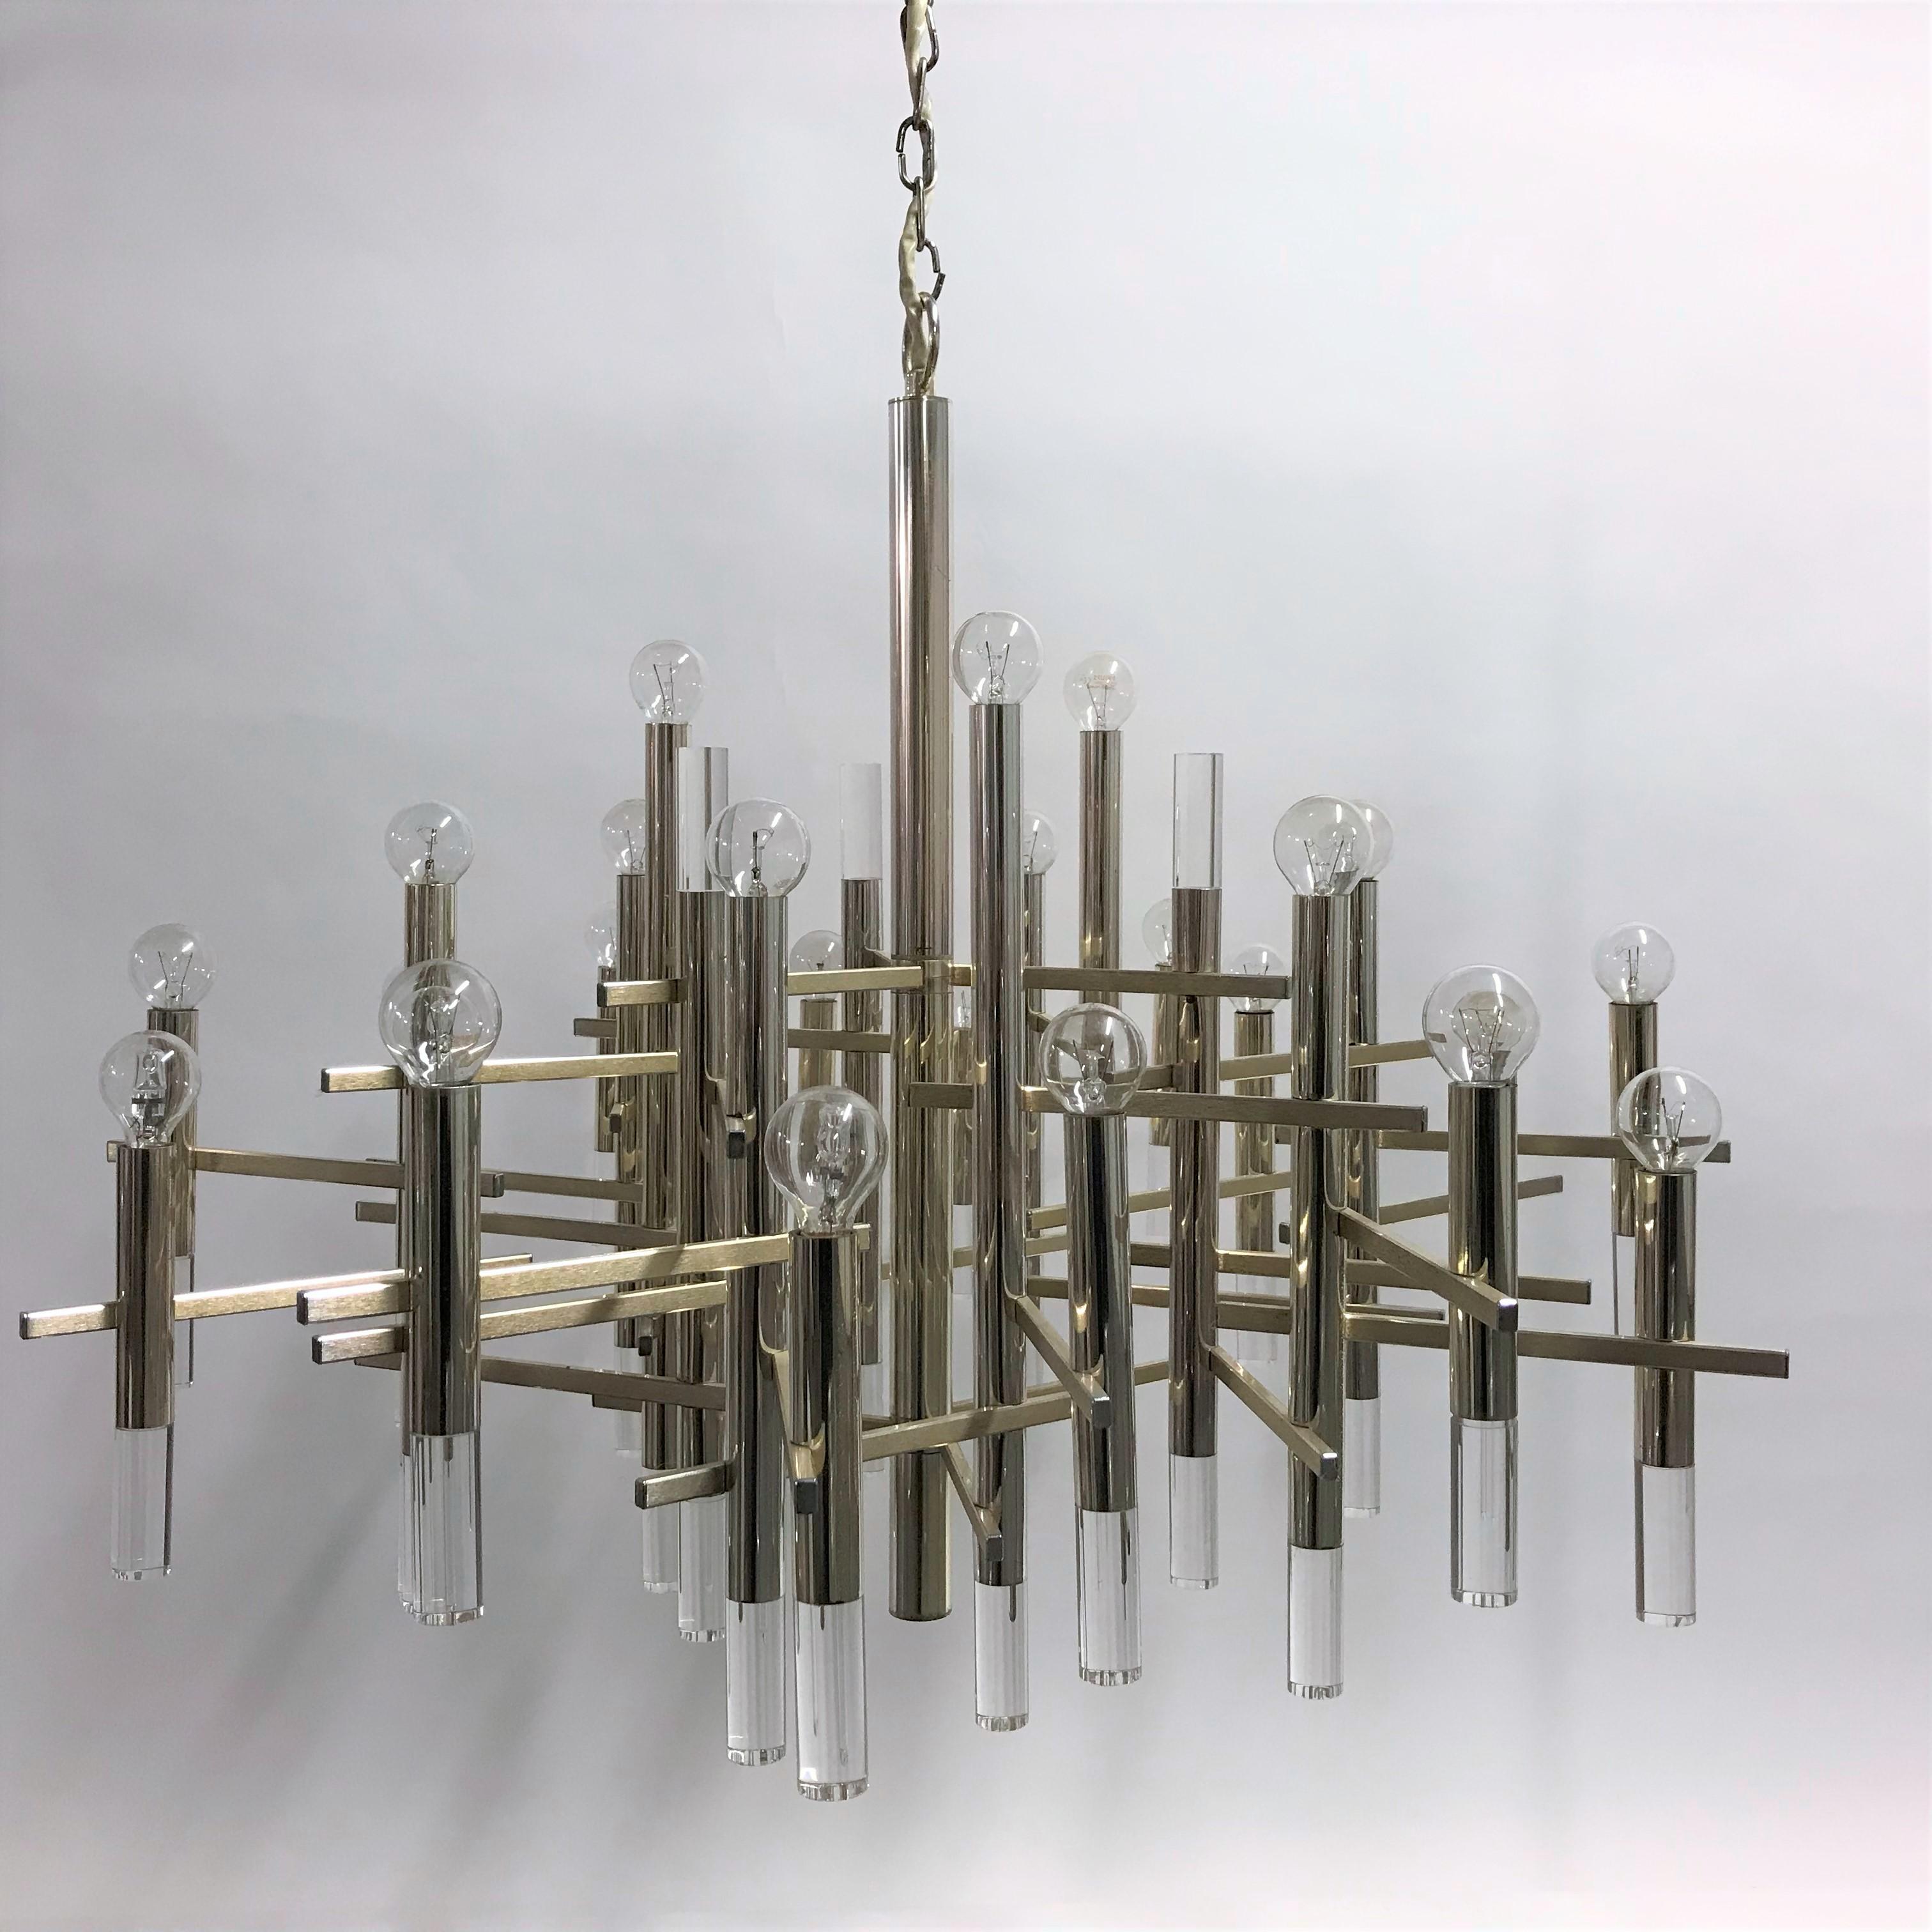 Hollywood Regency Large Gaetano Sciolari Chandelier in Chrome and Lucite , 1960s